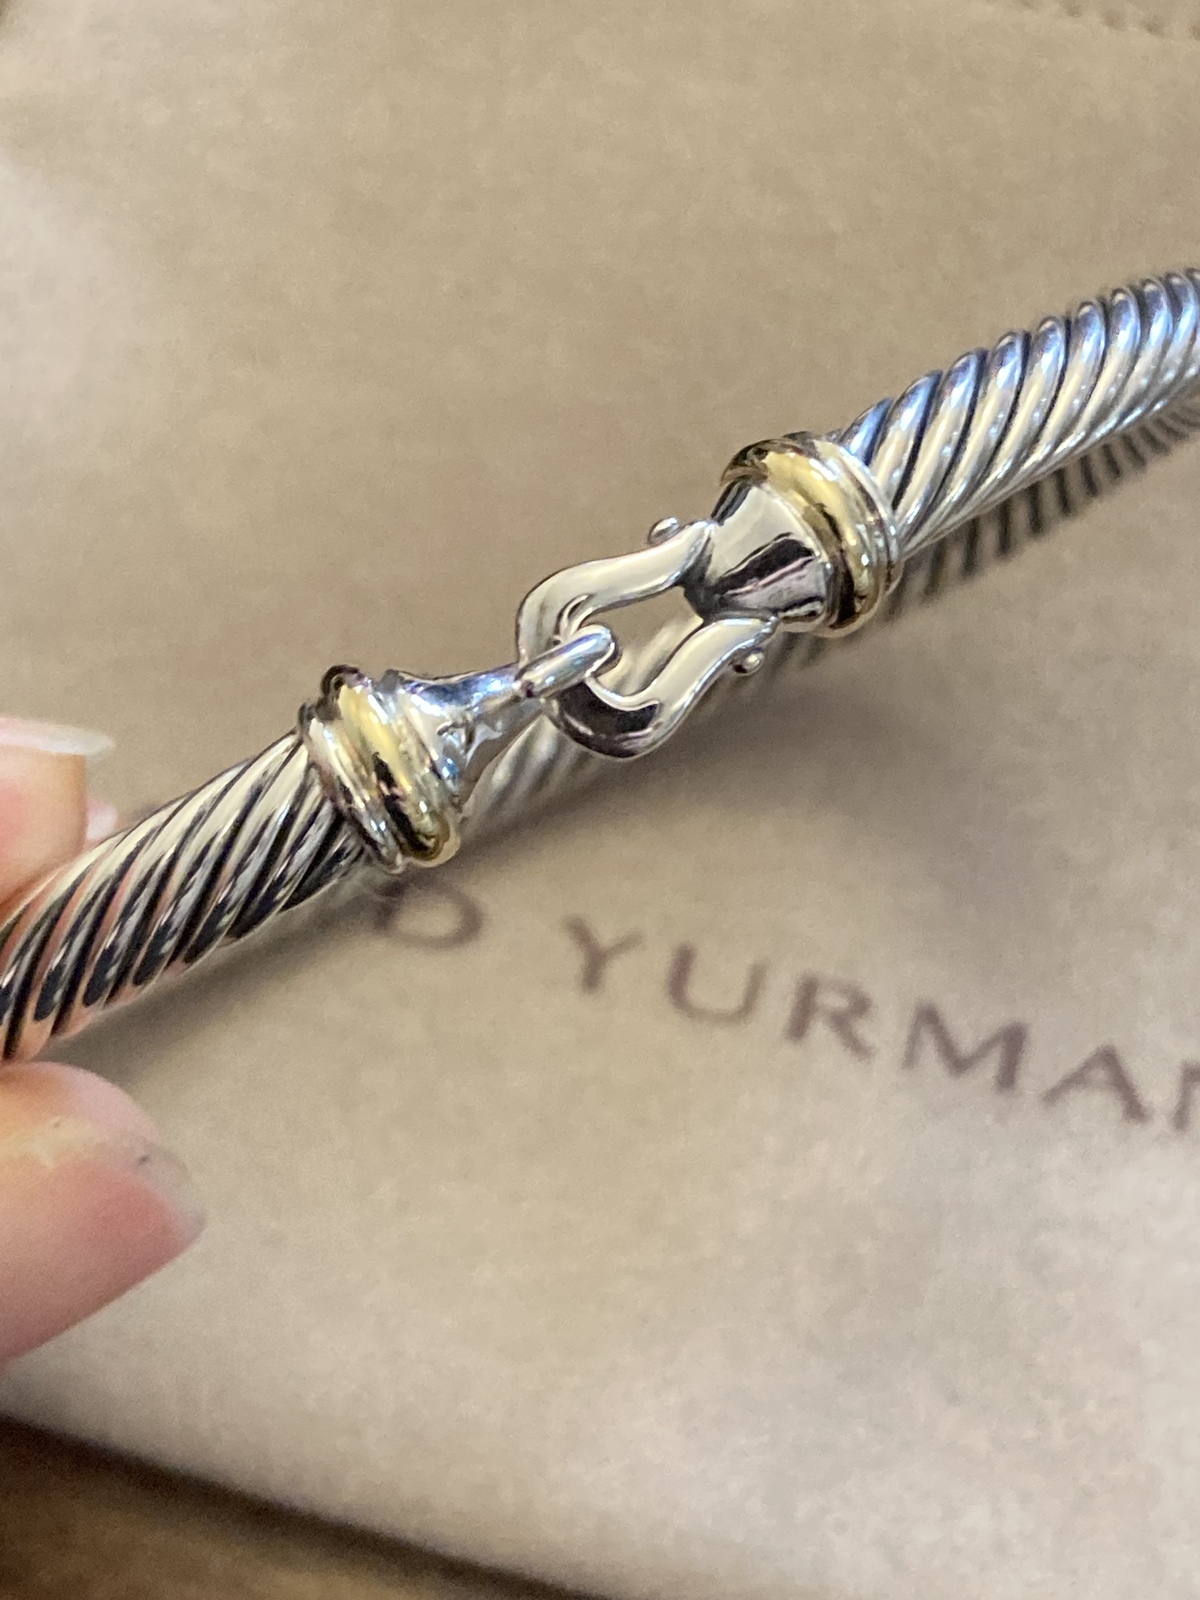 Primary image for PREVIOUSLY used David Yurman Buckle  5mm Bracelet With 18K Gold  LARGE SIZE 